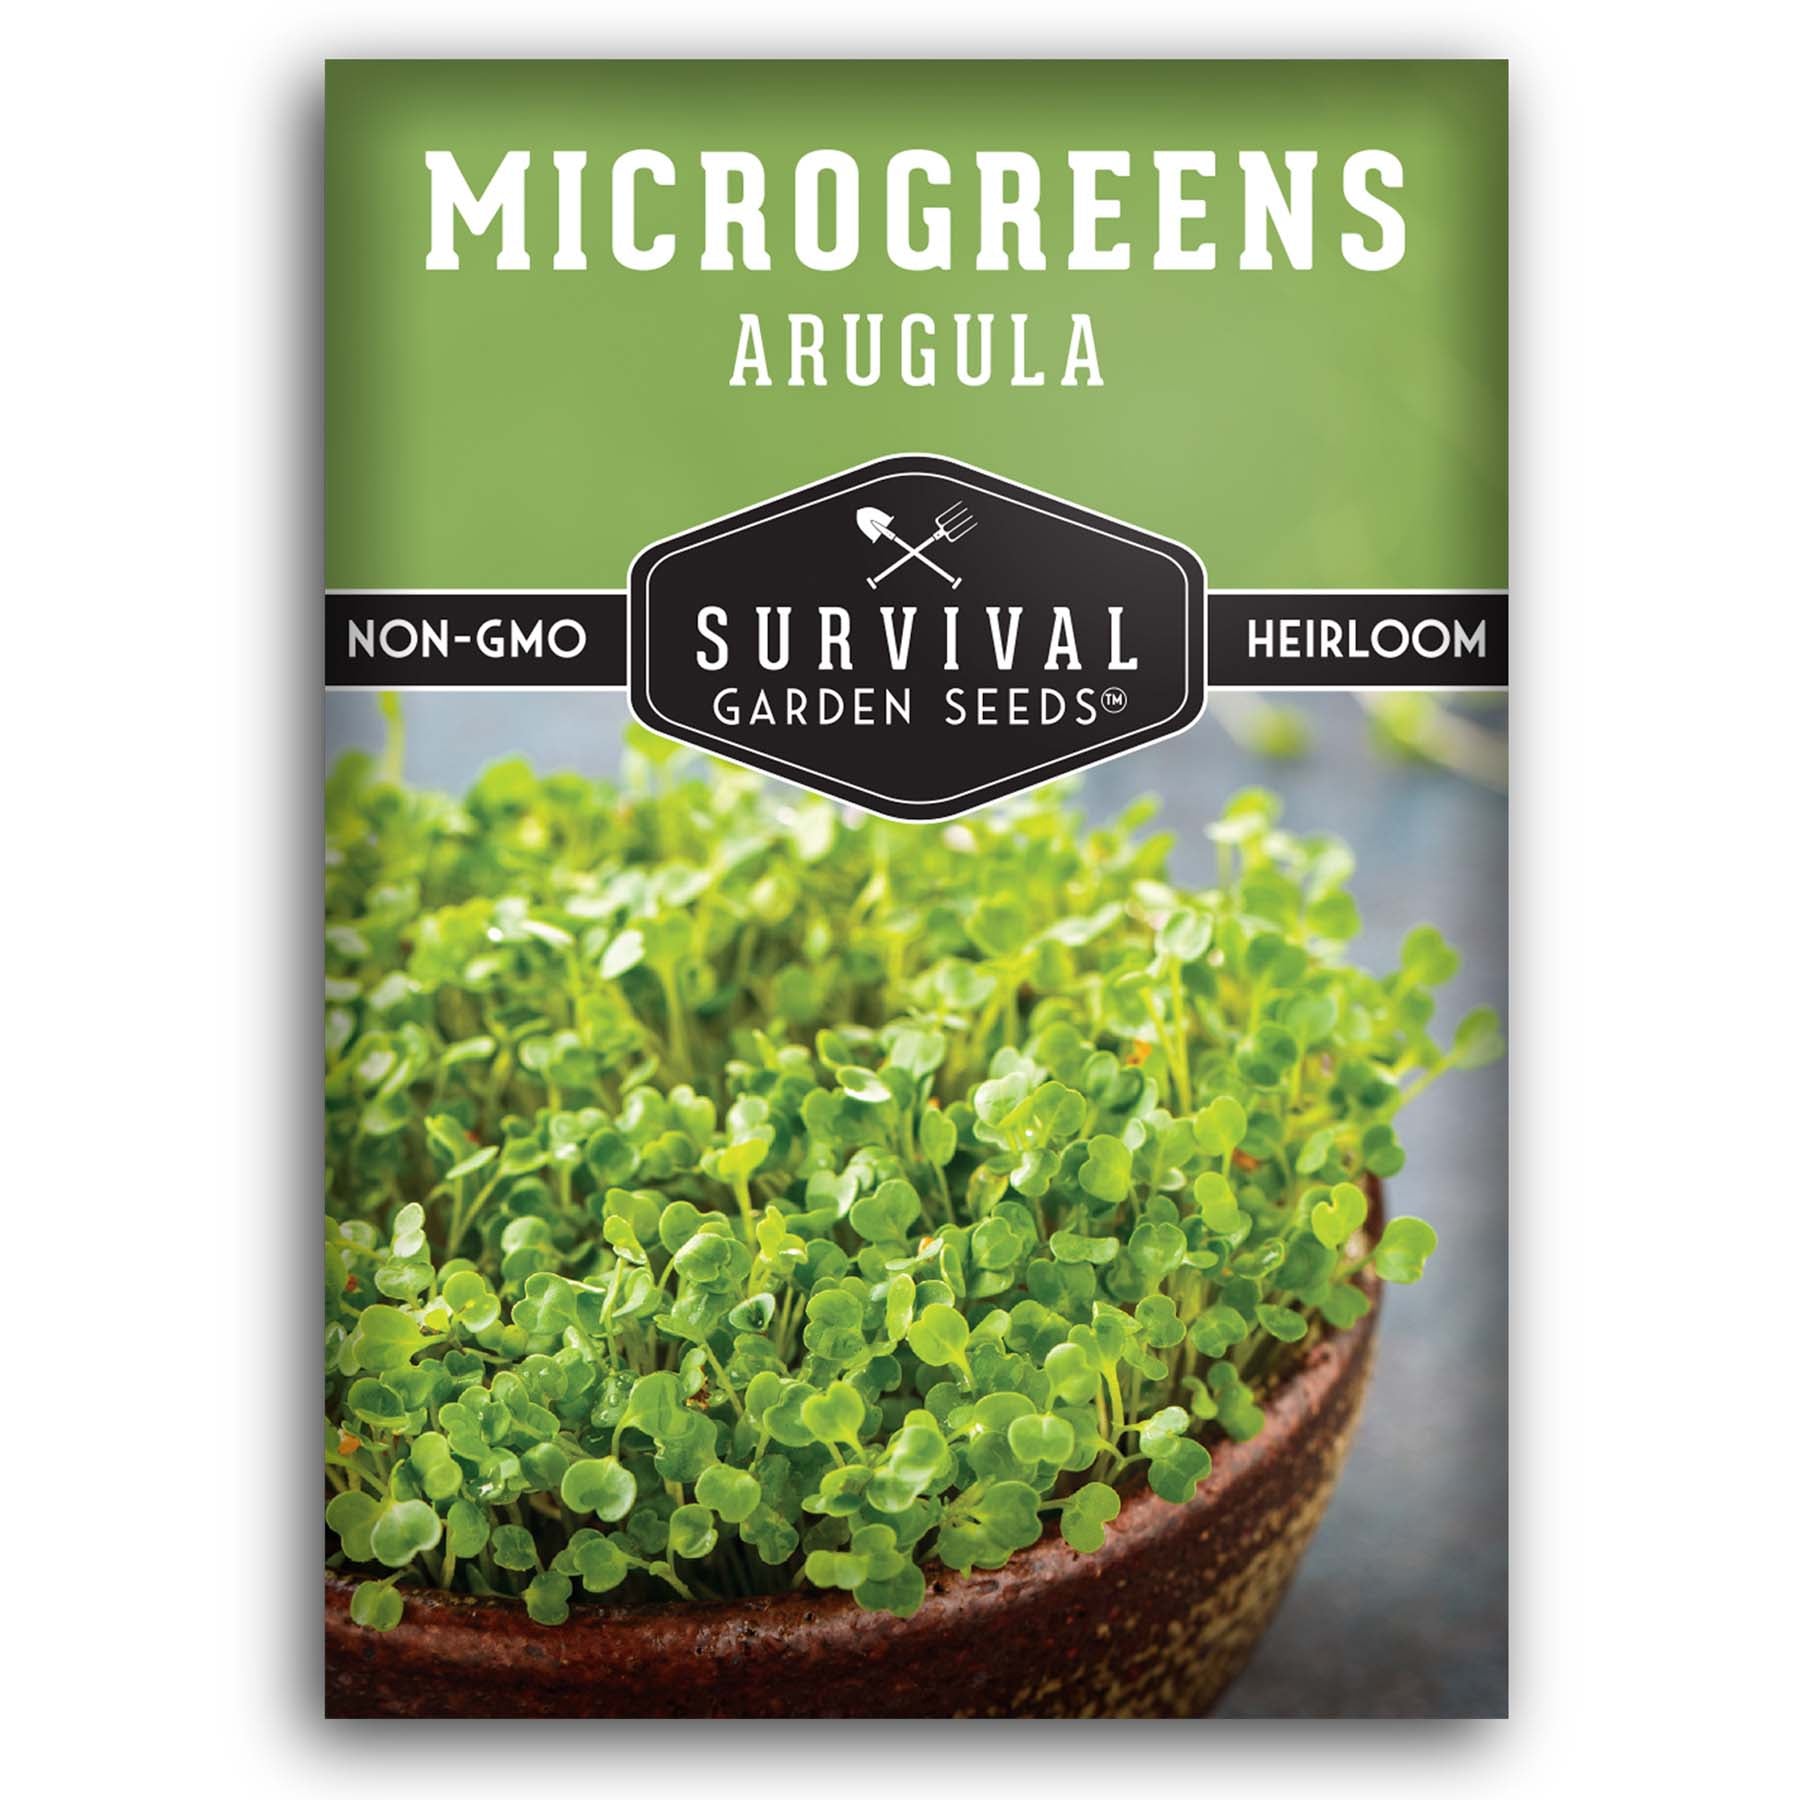 Arugula microgreens seeds for sprouting